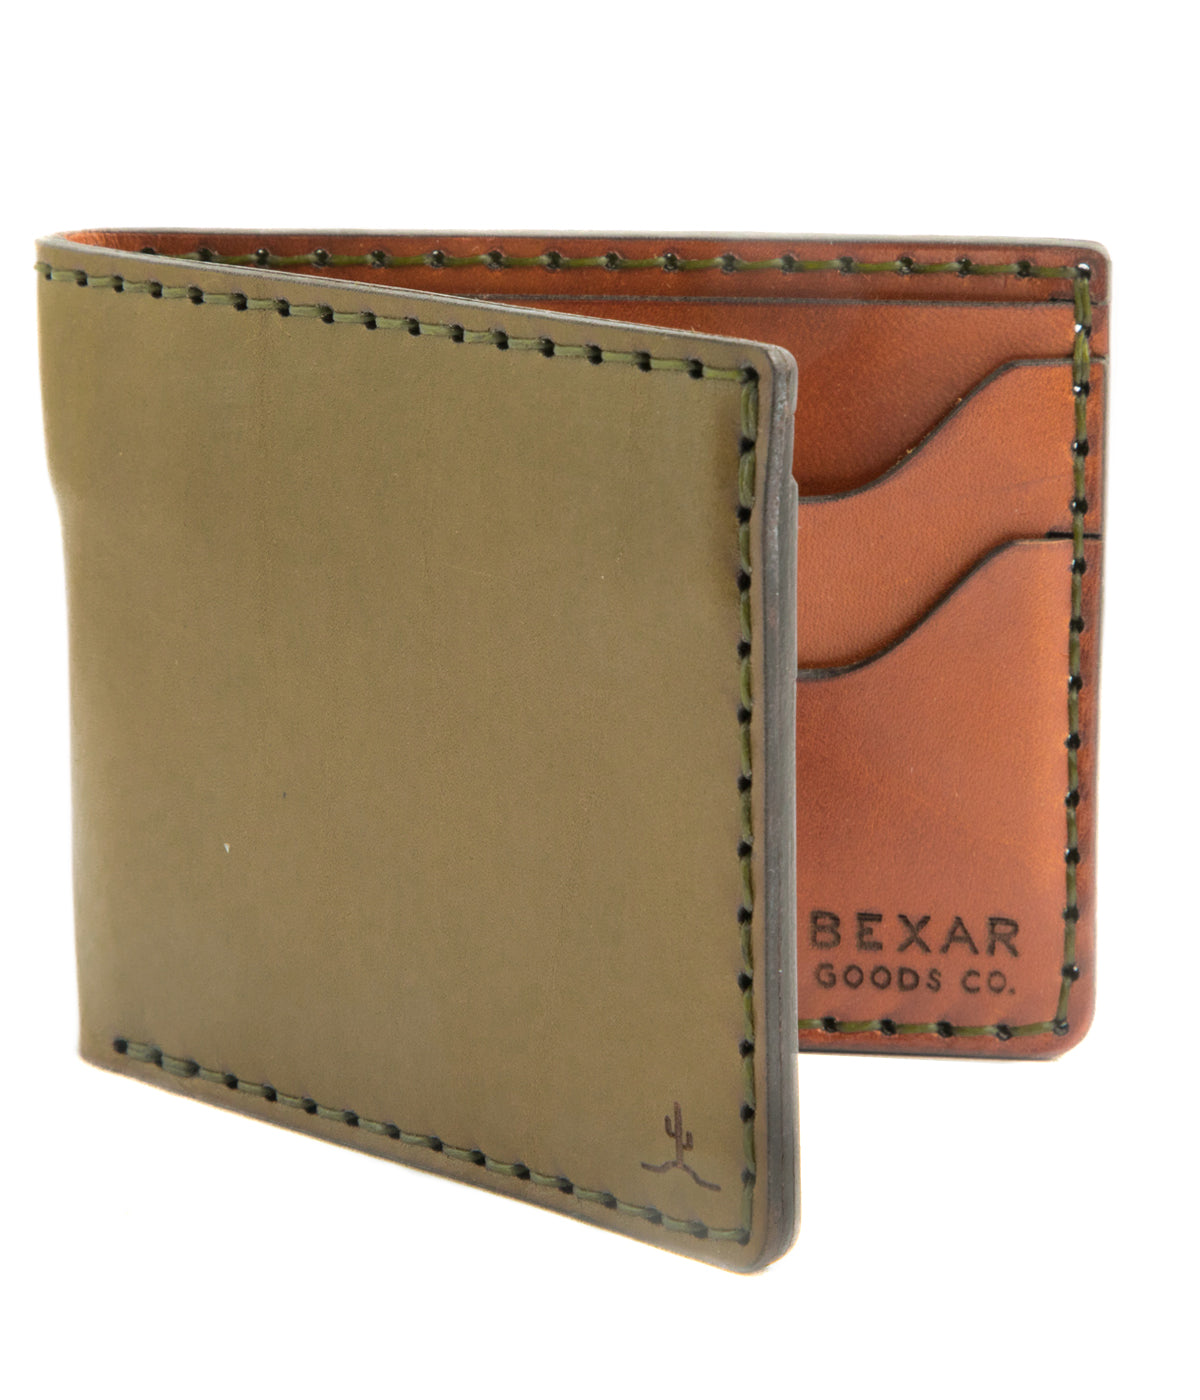 green exterior and brown interior leather four pocket bifold wallet